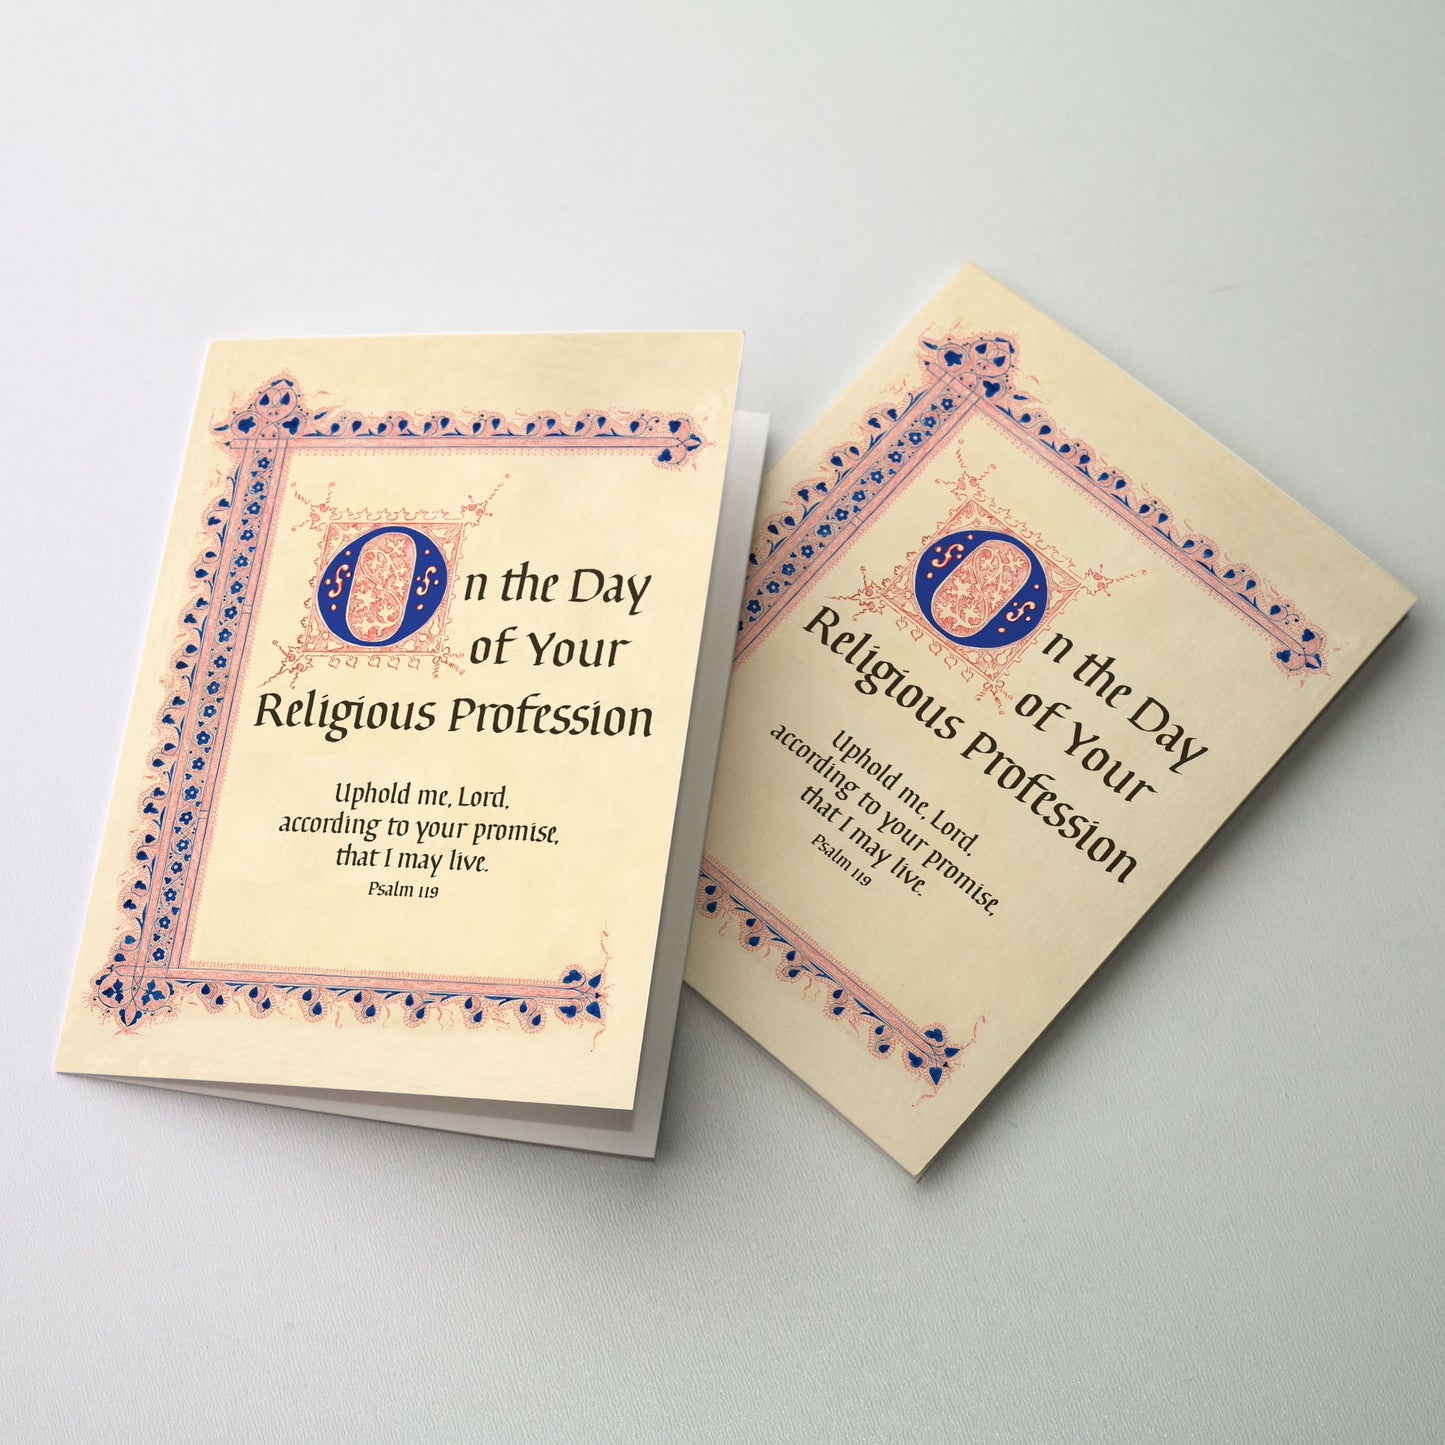 On the Day of Your Religious Profession - Religious Profession Card